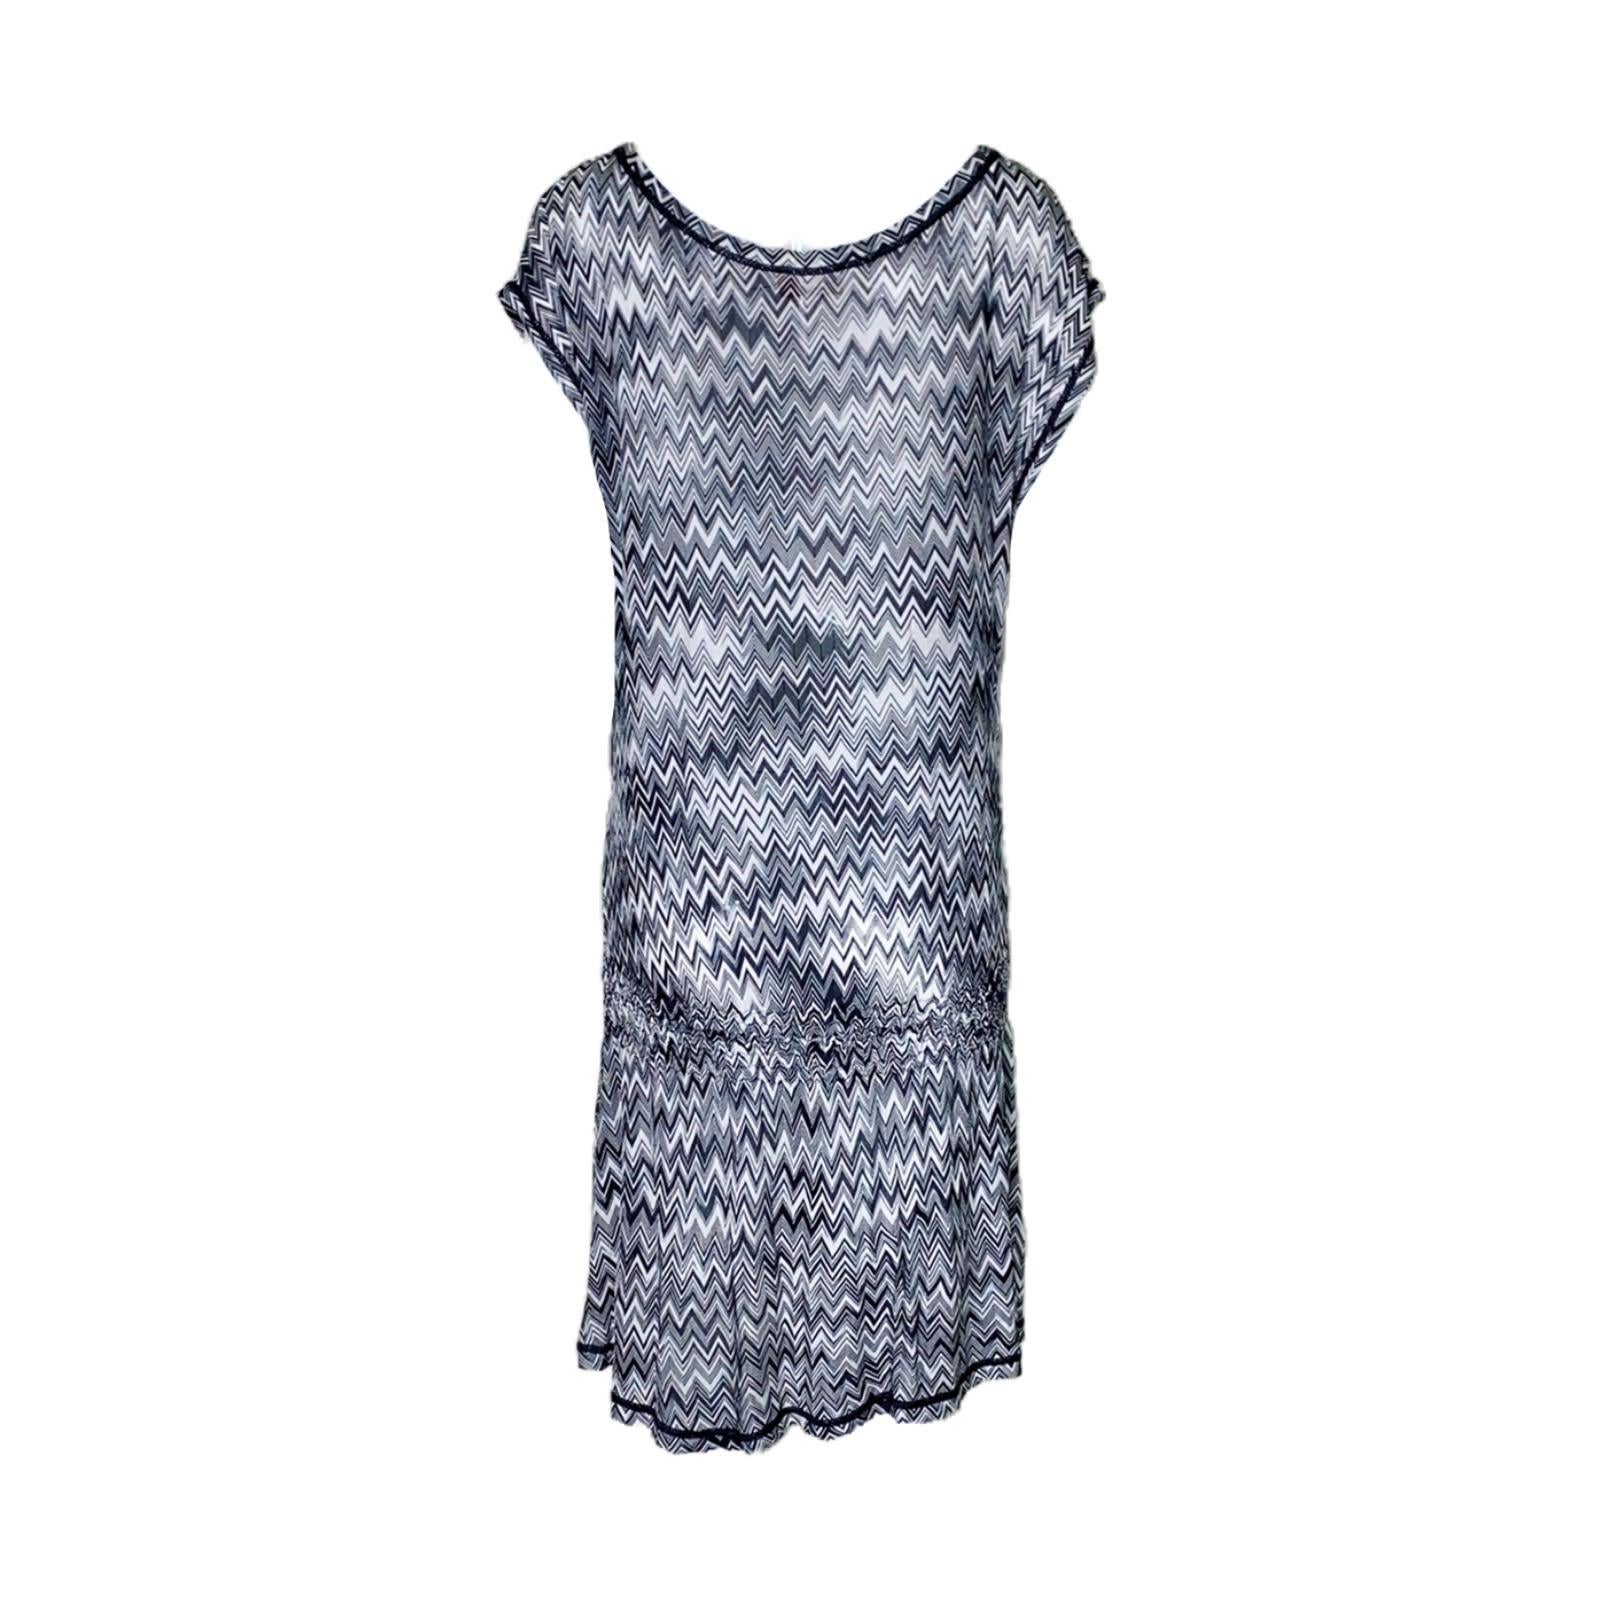 
Missoni's semi-sheer dress has been crafted in Italy using the label's signature crochet-knit technique. The relaxed shape makes it perfect for slipping on over a bikini or to dress it up with heels for a night out.


Missoni signature black and